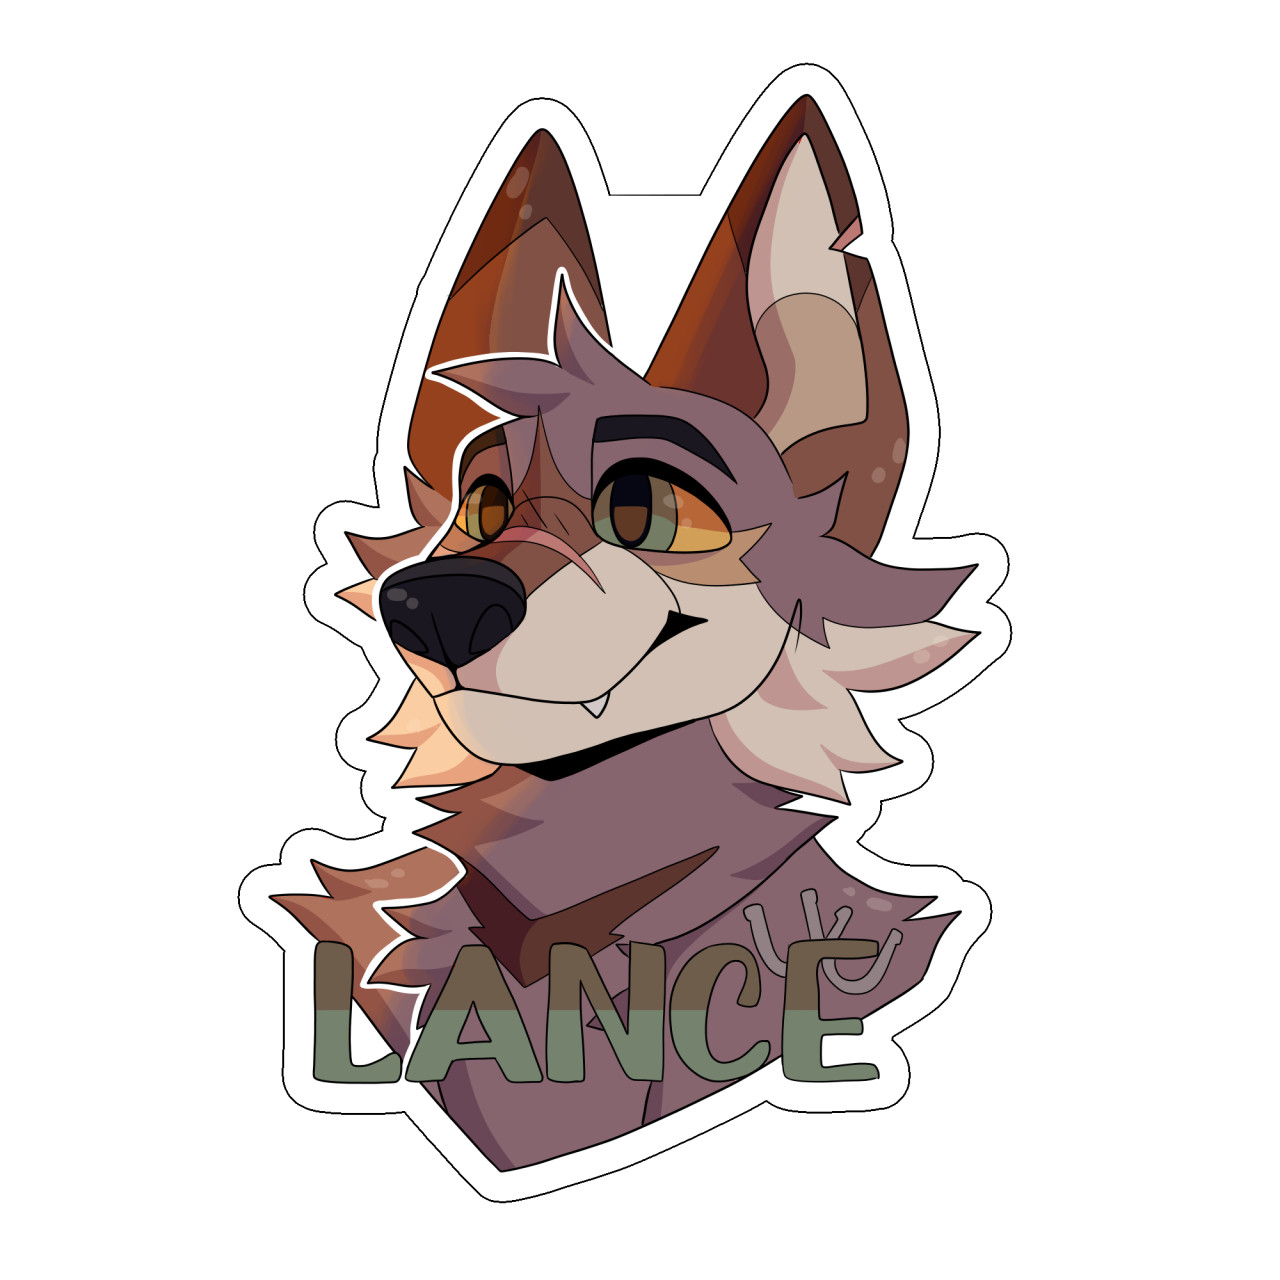 LANCE COYOTE' BADGE by Coyot3 -- Fur Affinity [dot] net